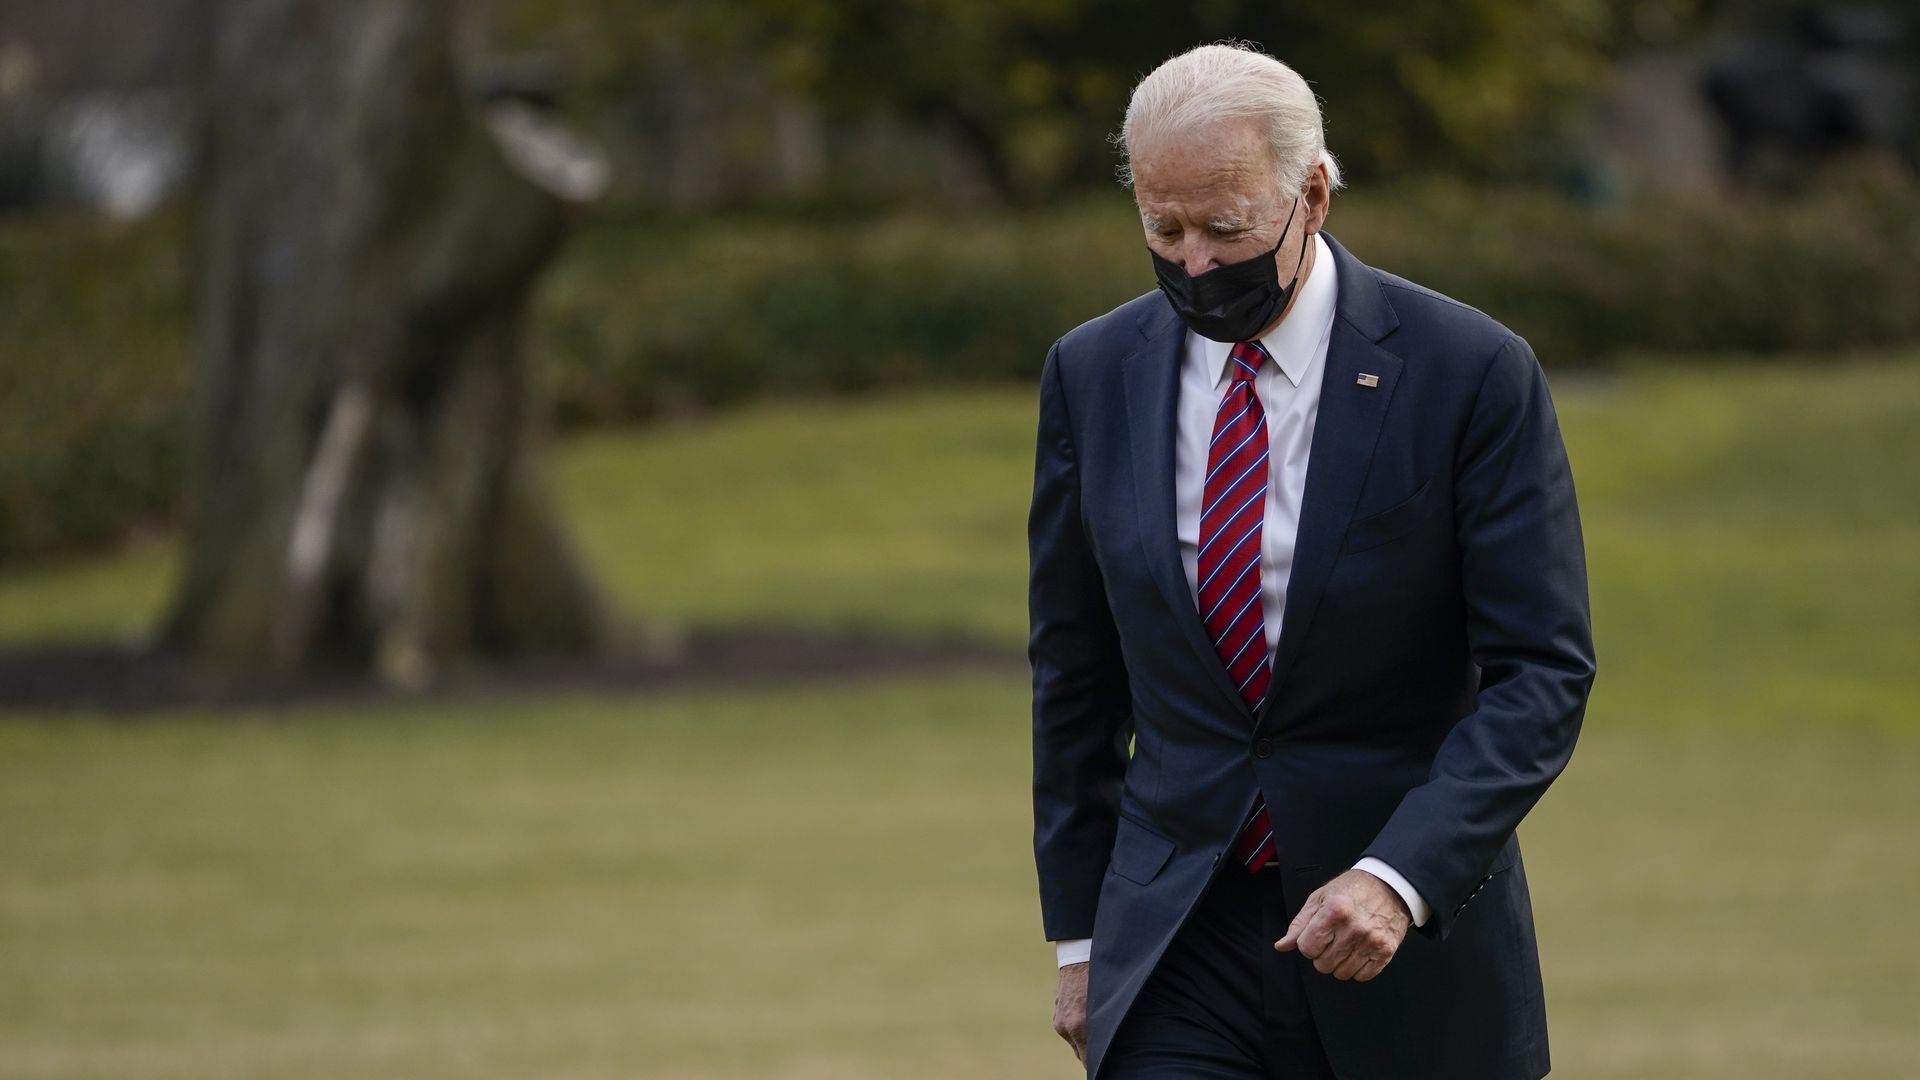 President Biden is seen walking back into the White House after arriving on Marine One.